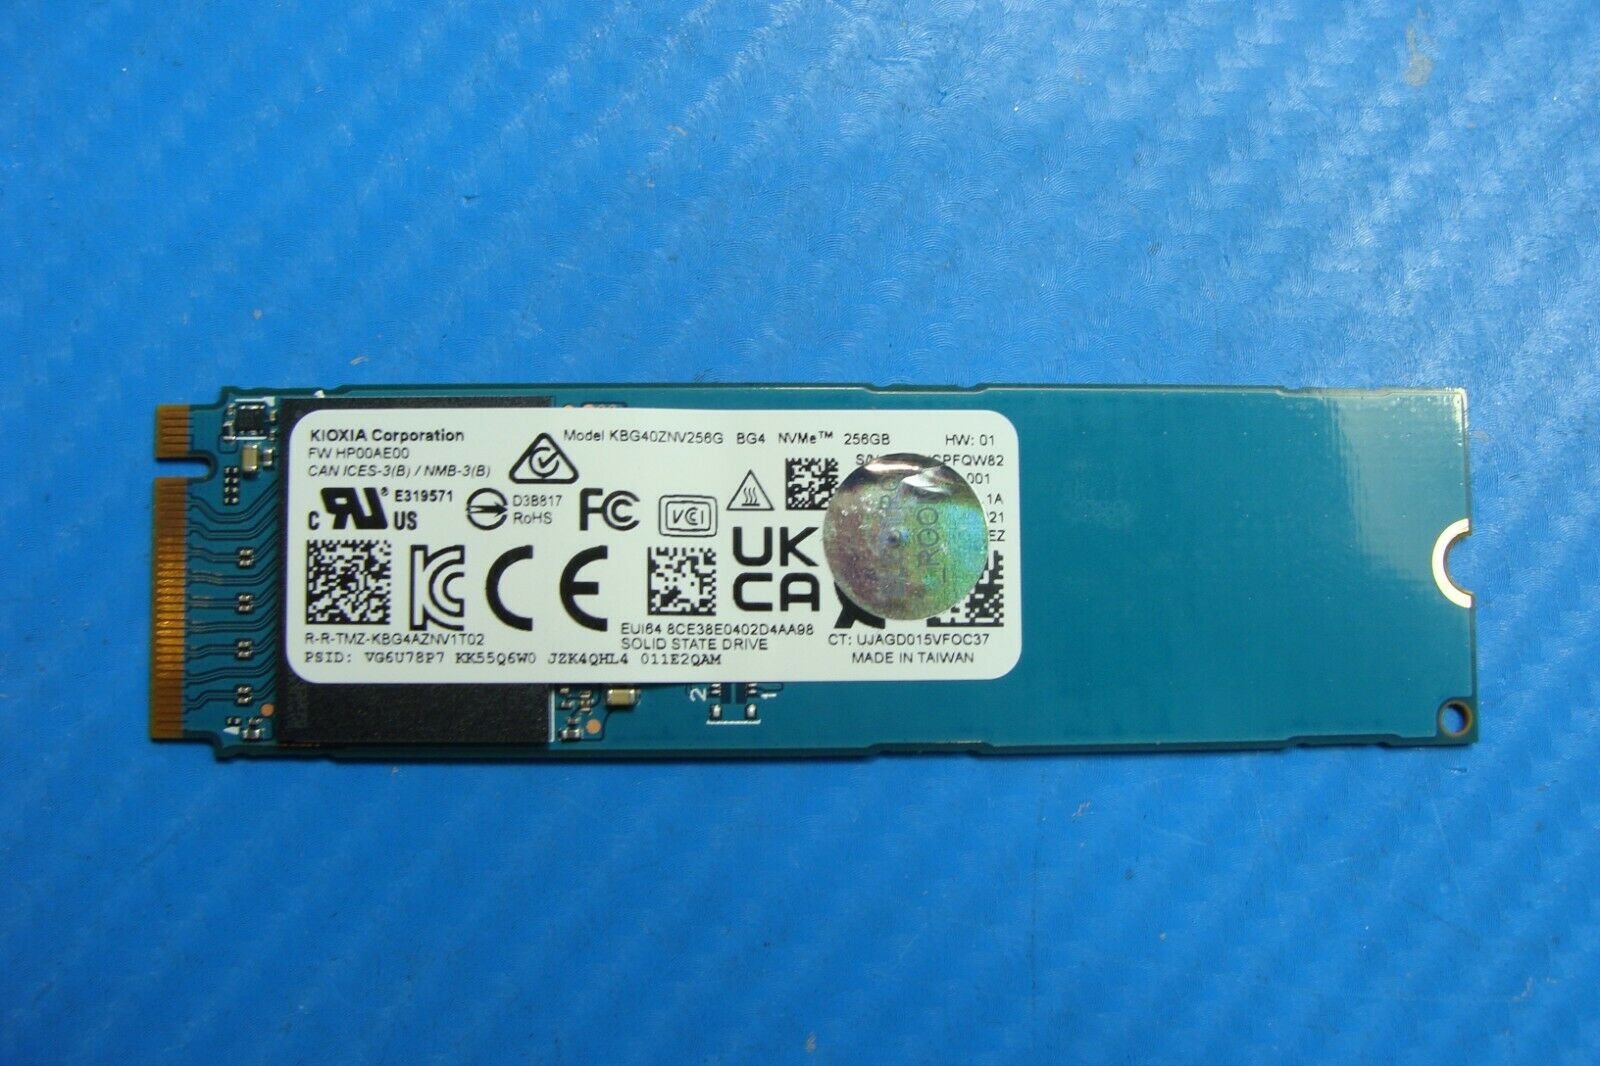 HP 450 G8 Kioxia 256Gb M.2 NVMe SSD Solid State Drive kbg40znv256g - Laptop Parts - Buy Authentic Computer Parts - Top Seller Ebay